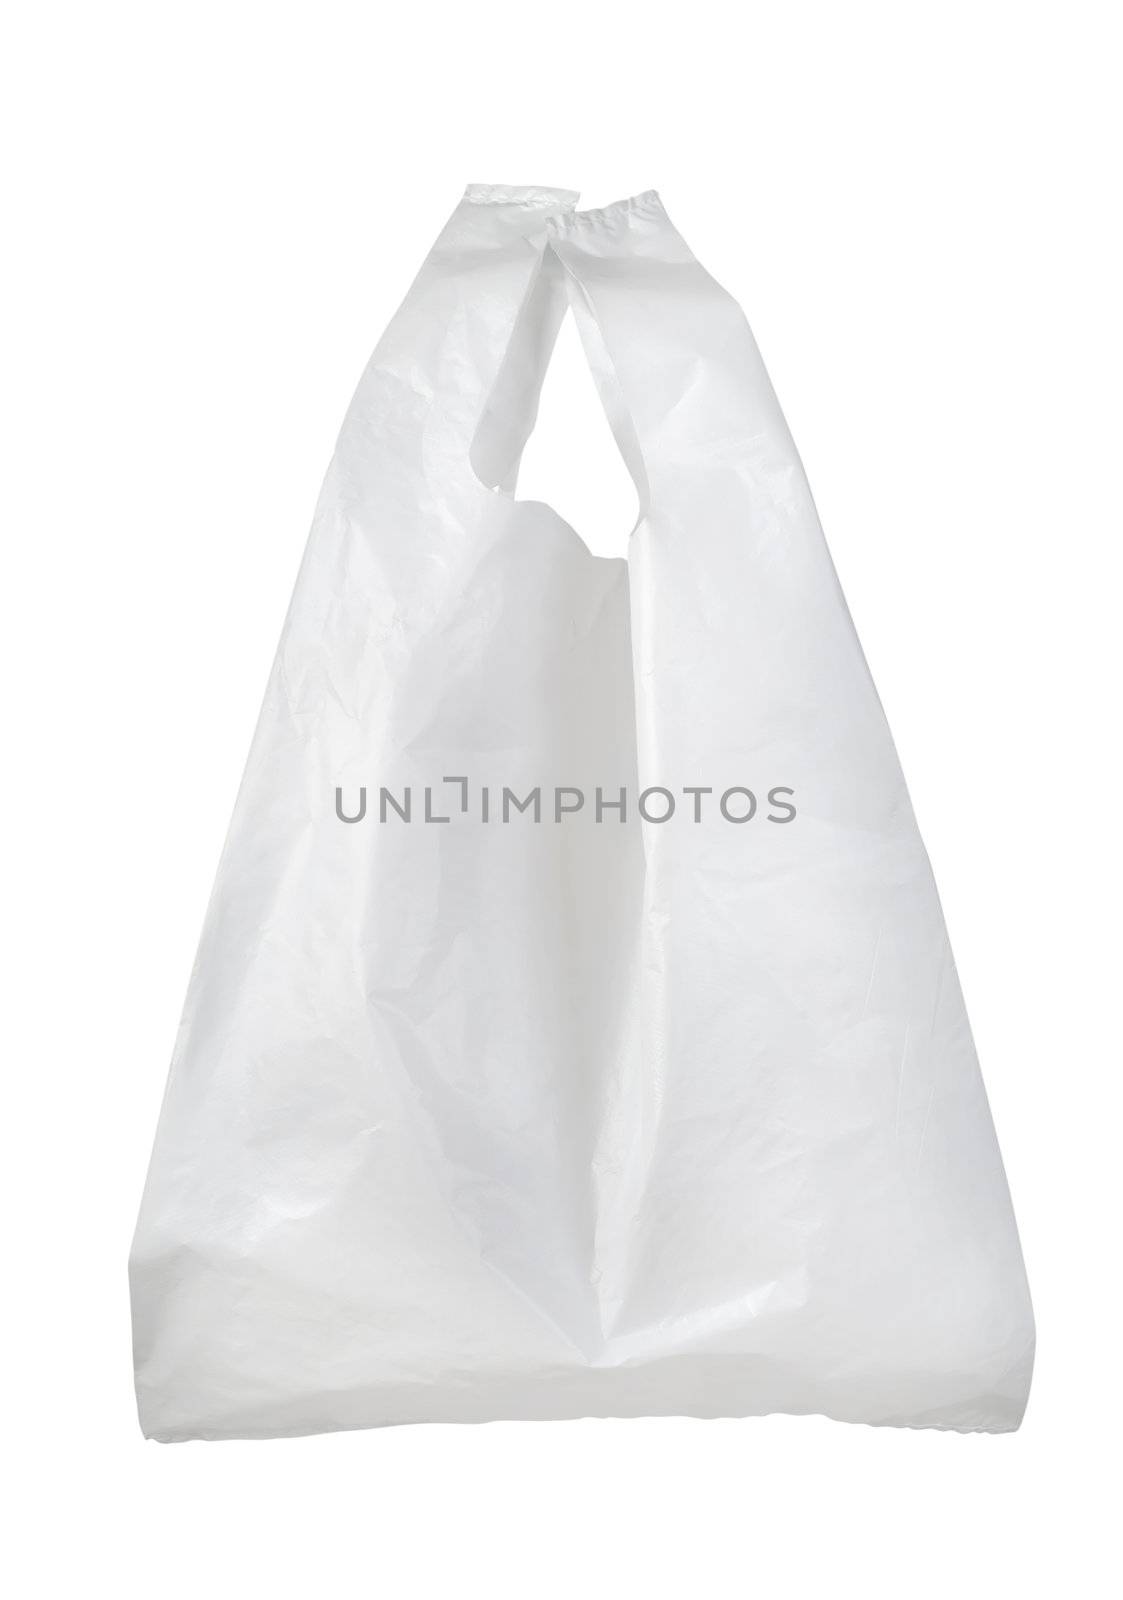 White plastic bag isolated on a white background